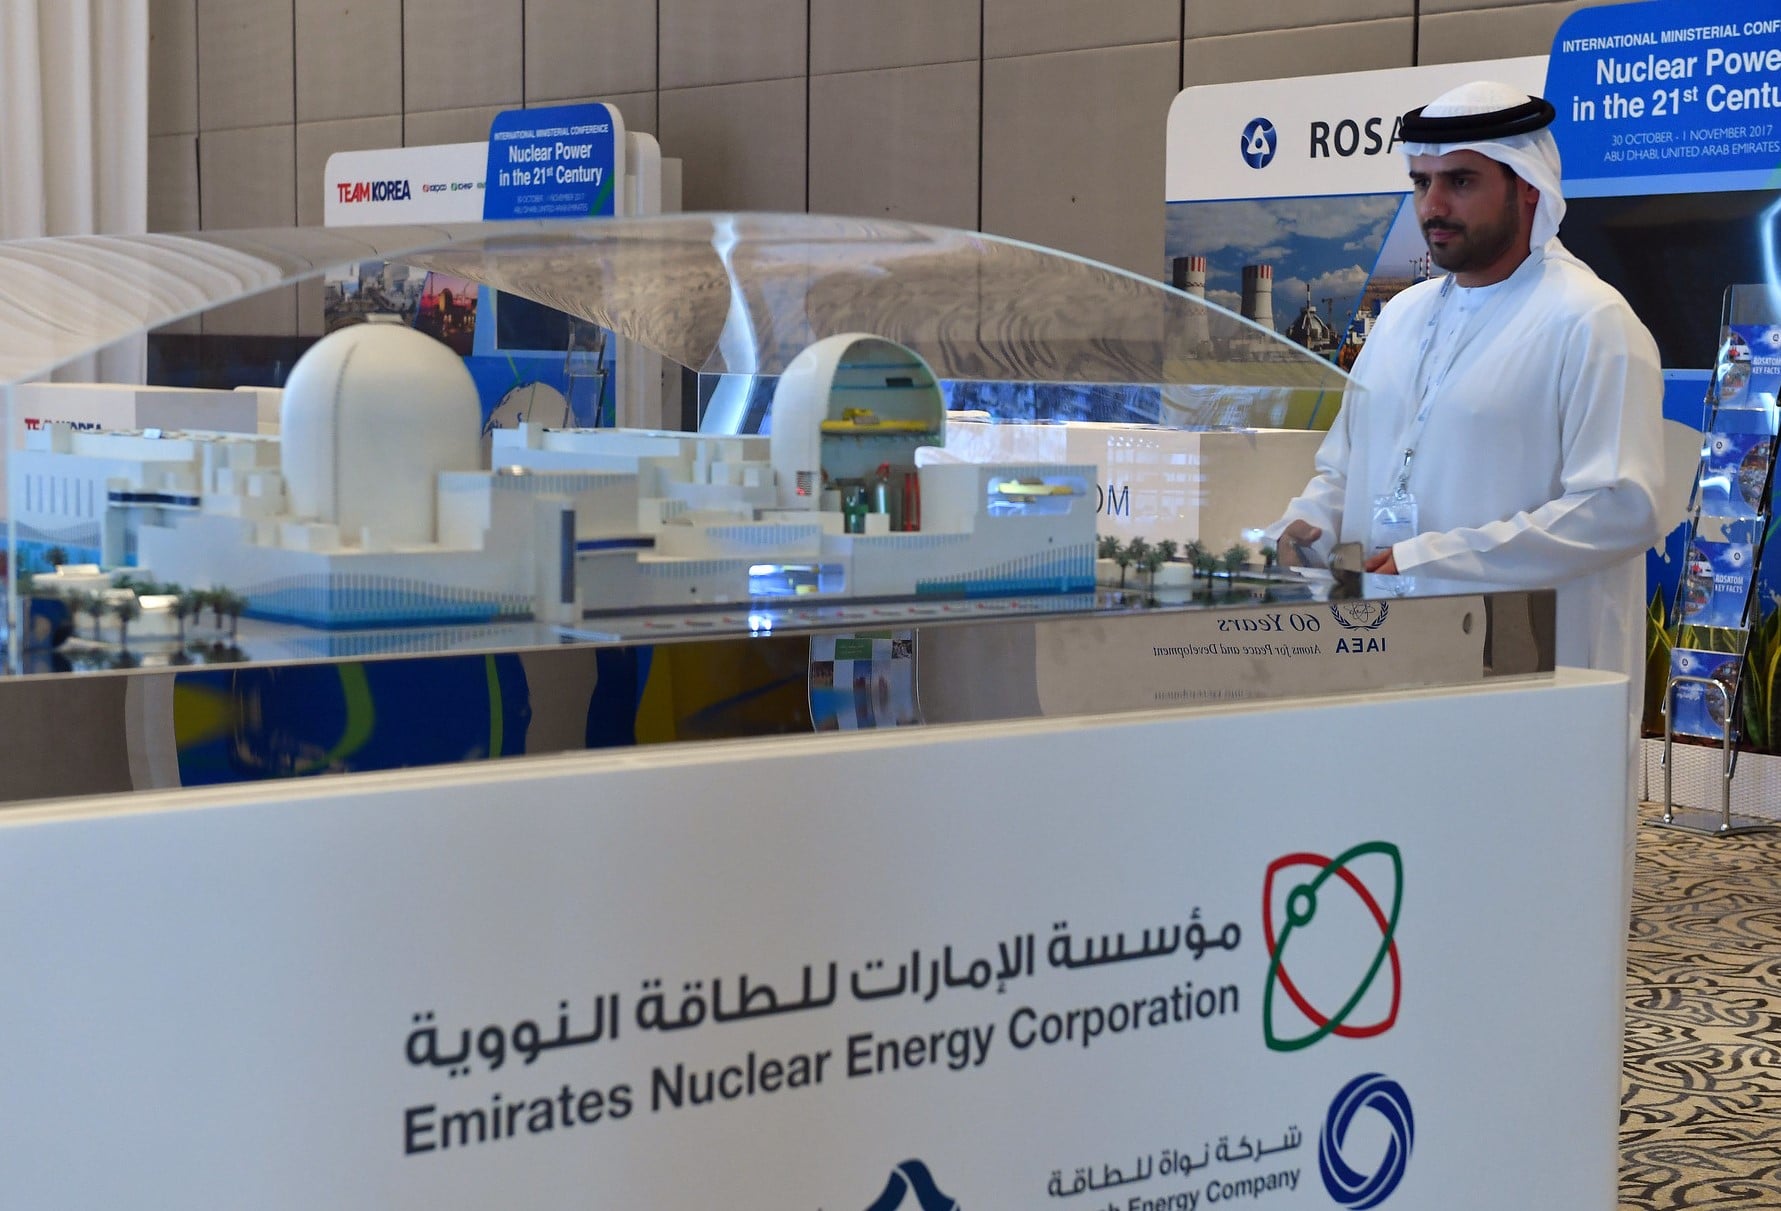 For UAE, the political perks of nuclear power eclipse economics - Bulletin the Atomic Scientists